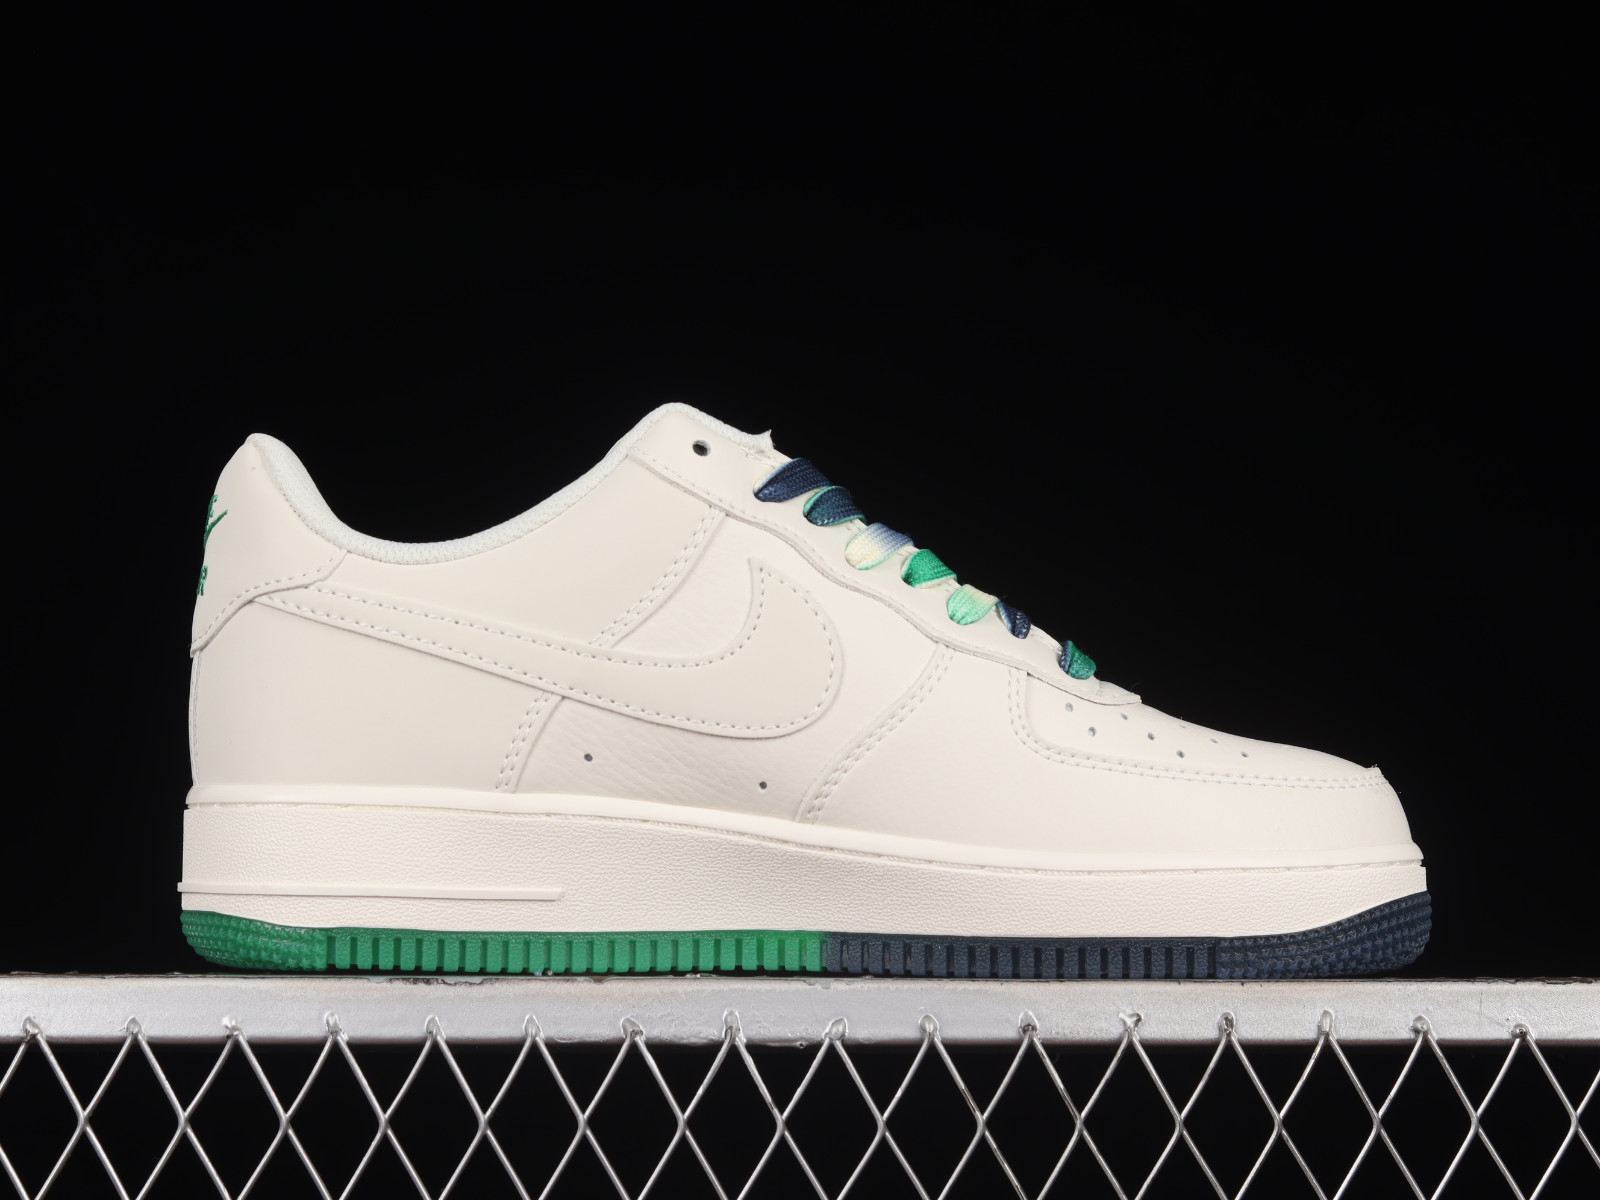 nike flyknit shipping singapore price list - Nike Air Force 1 07 Low Blue Green White DD5969 - 899 - GmarShops